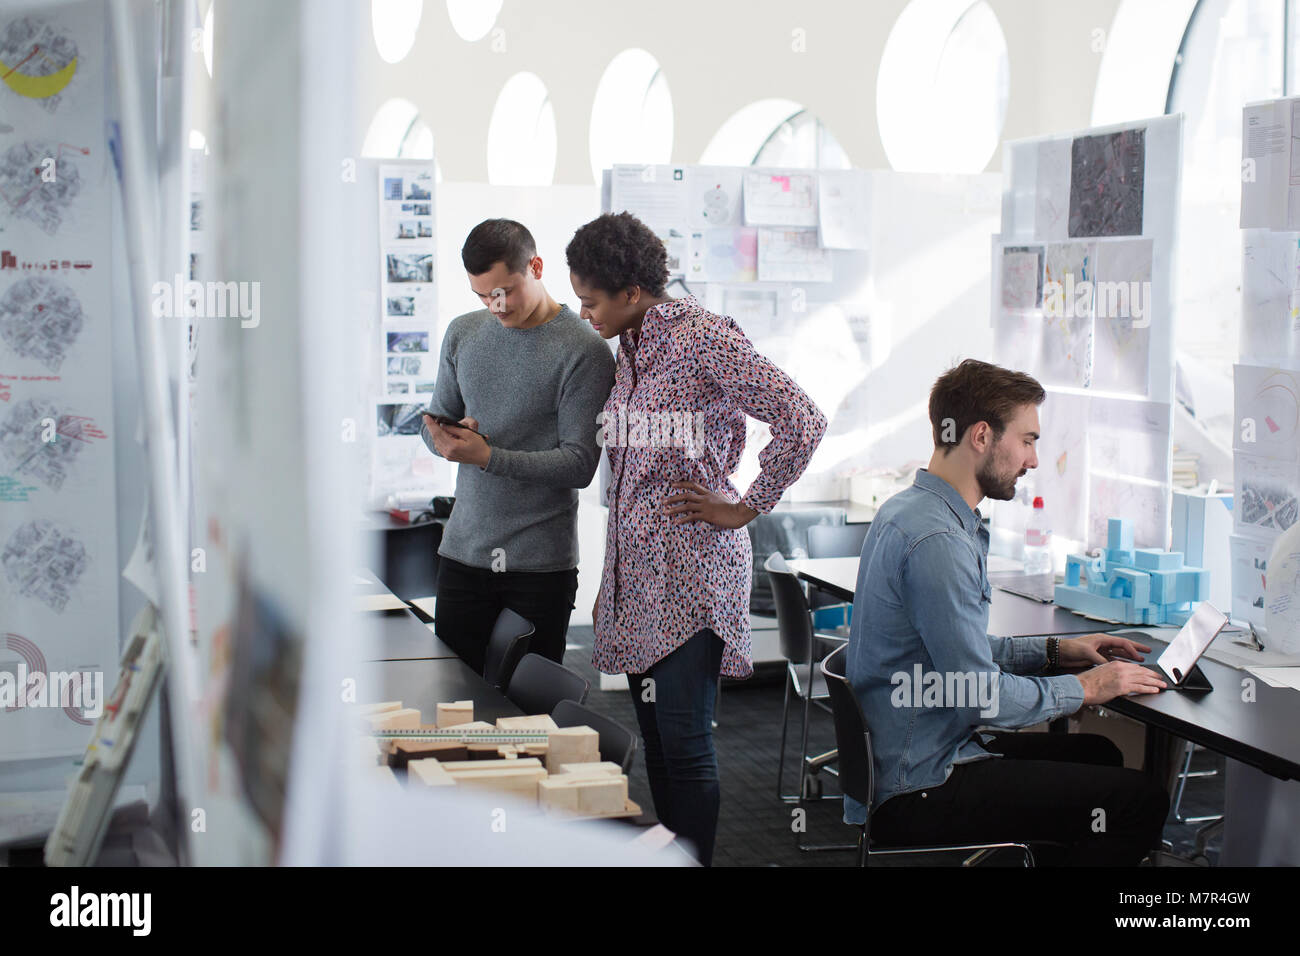 Designers looking at smartphone in creative workspace Stock Photo